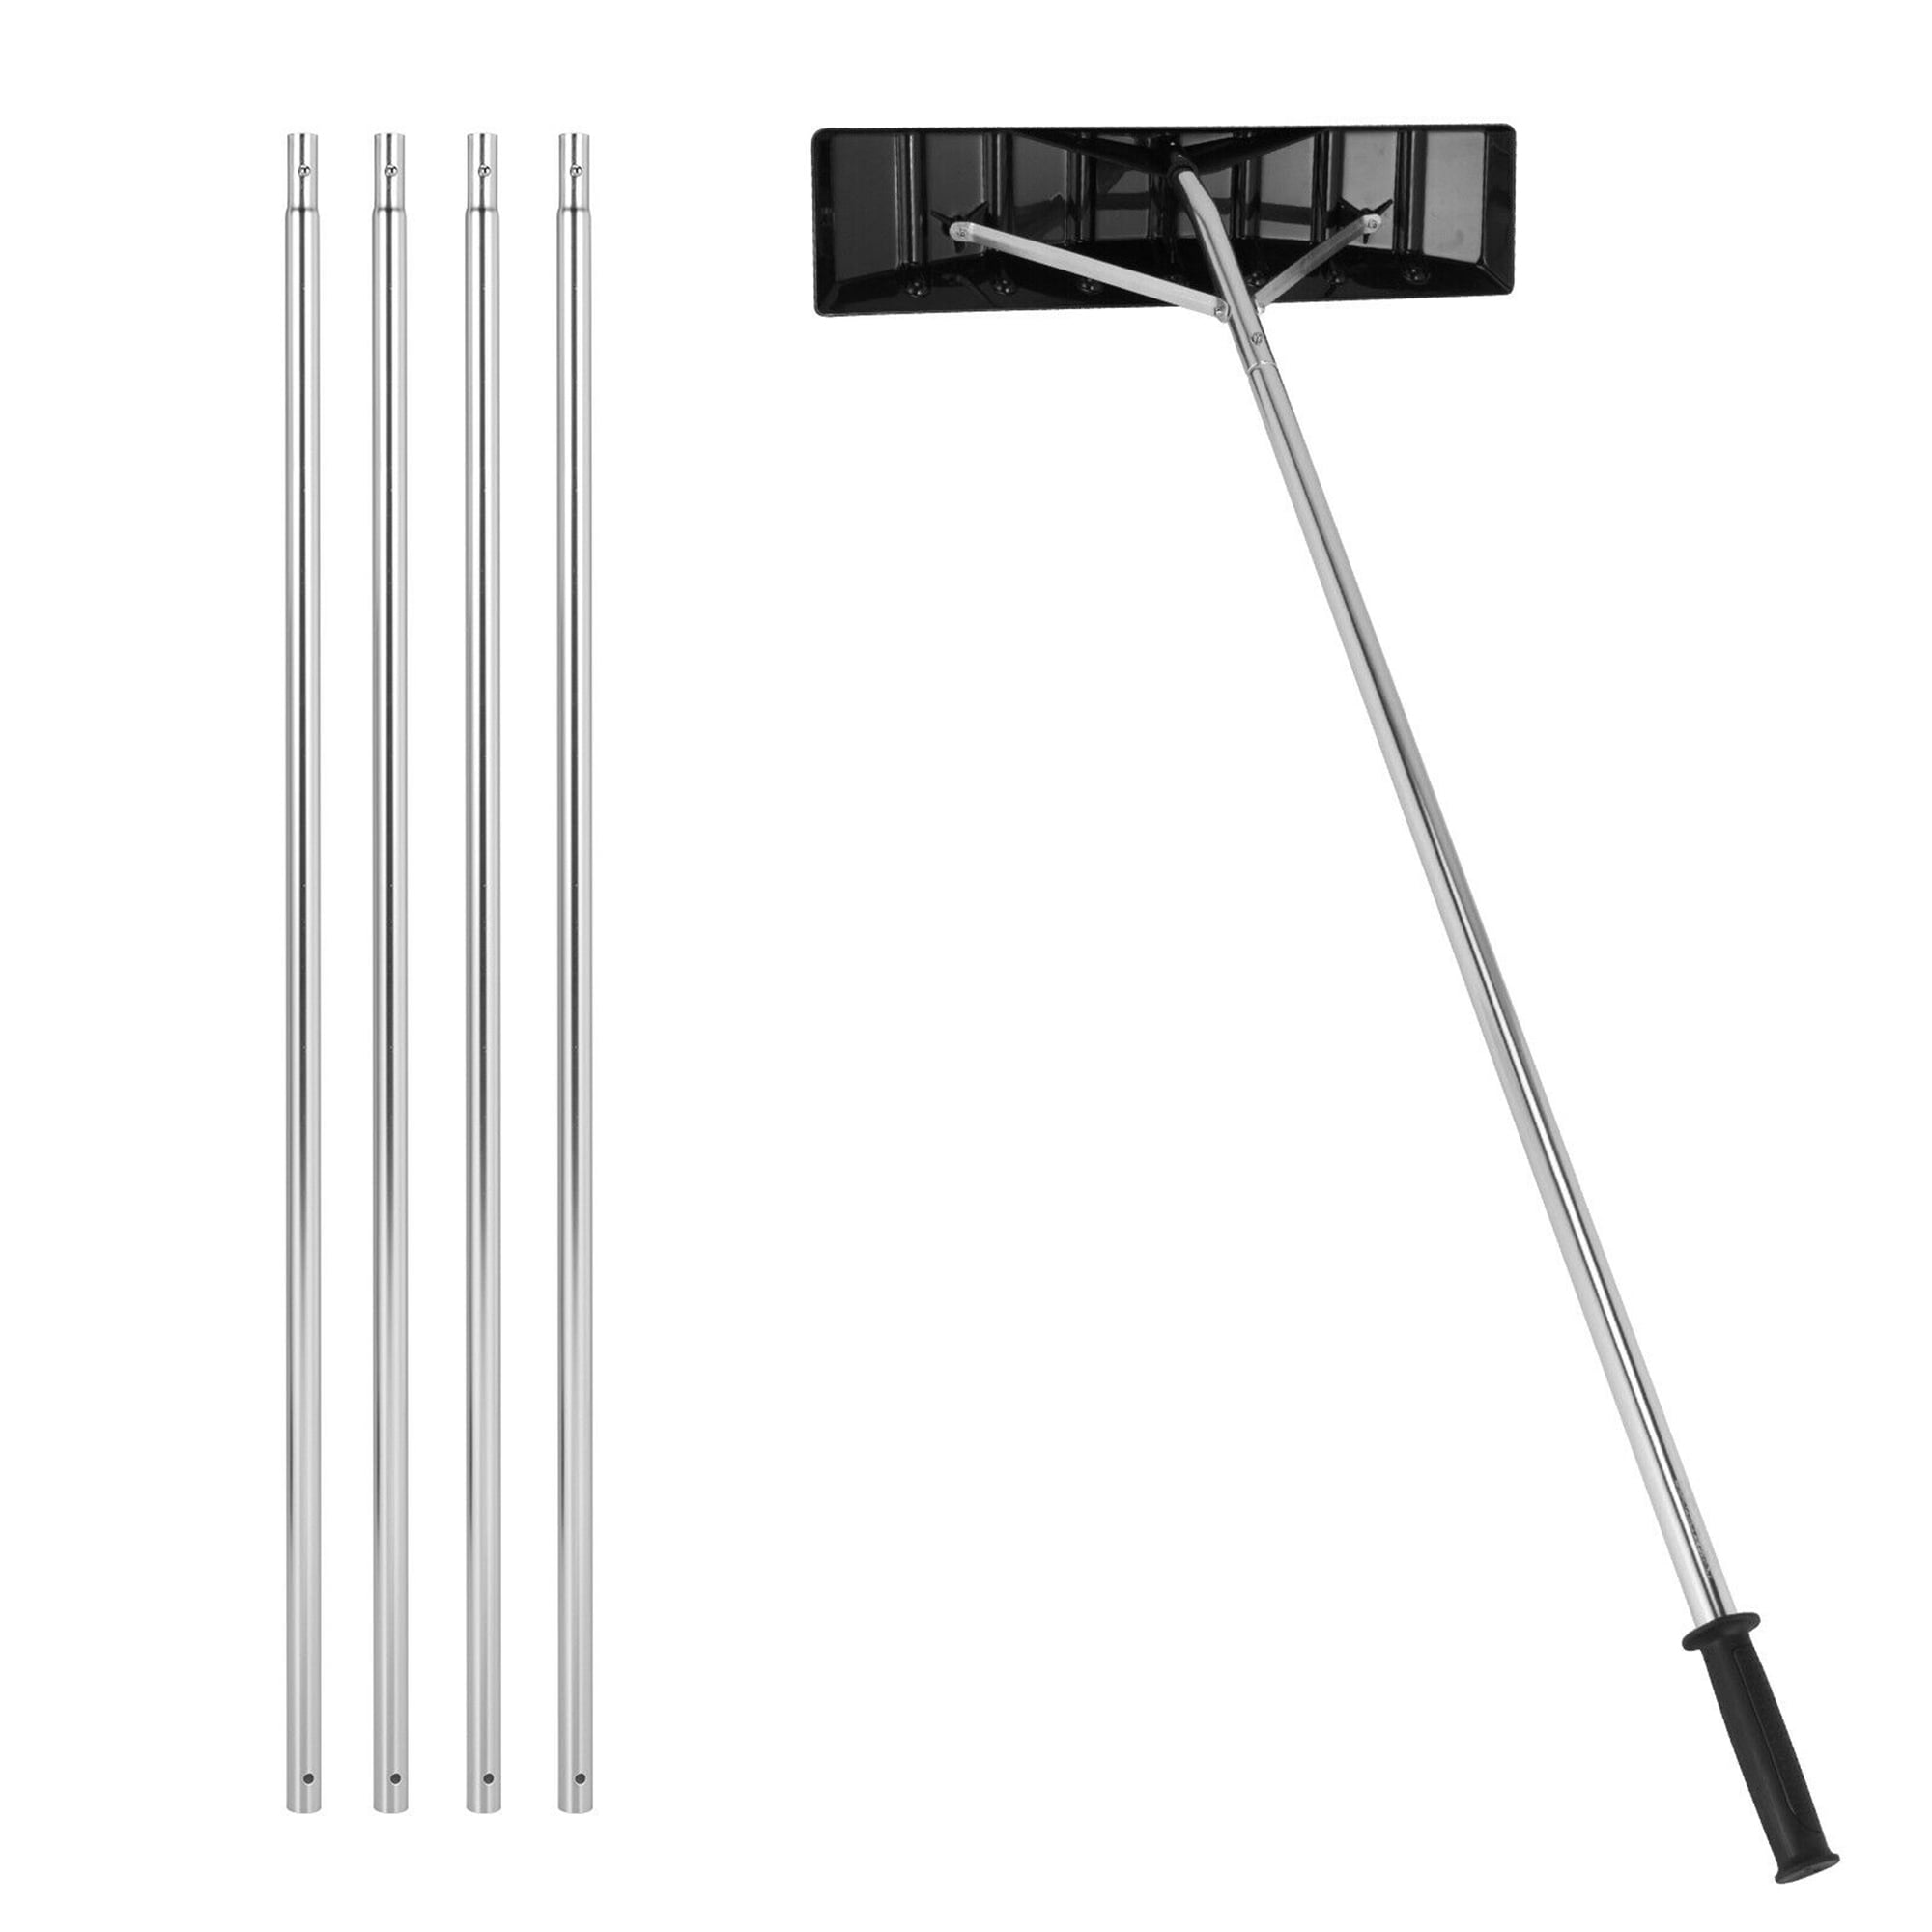 5ft to 20ft Length Adjustable Handle 5ft to 20ft Lightweight Snow Removel Tool w/ 26 inch Width Blade Goplus Aluminum Snow Rake 